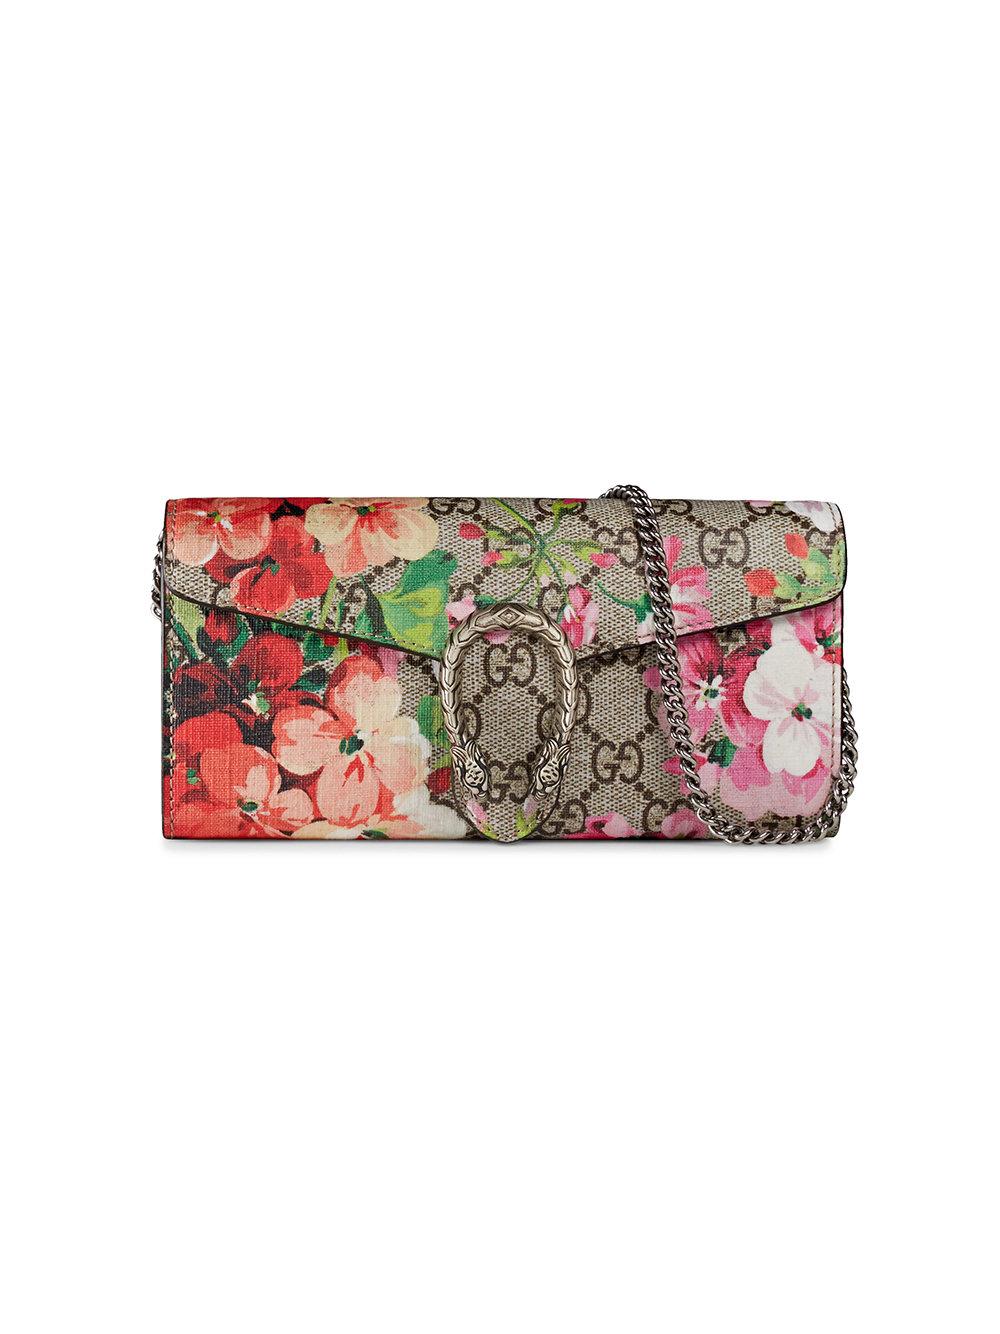 Lyst - Gucci Dionysus Gg Blooms Chain Wallet